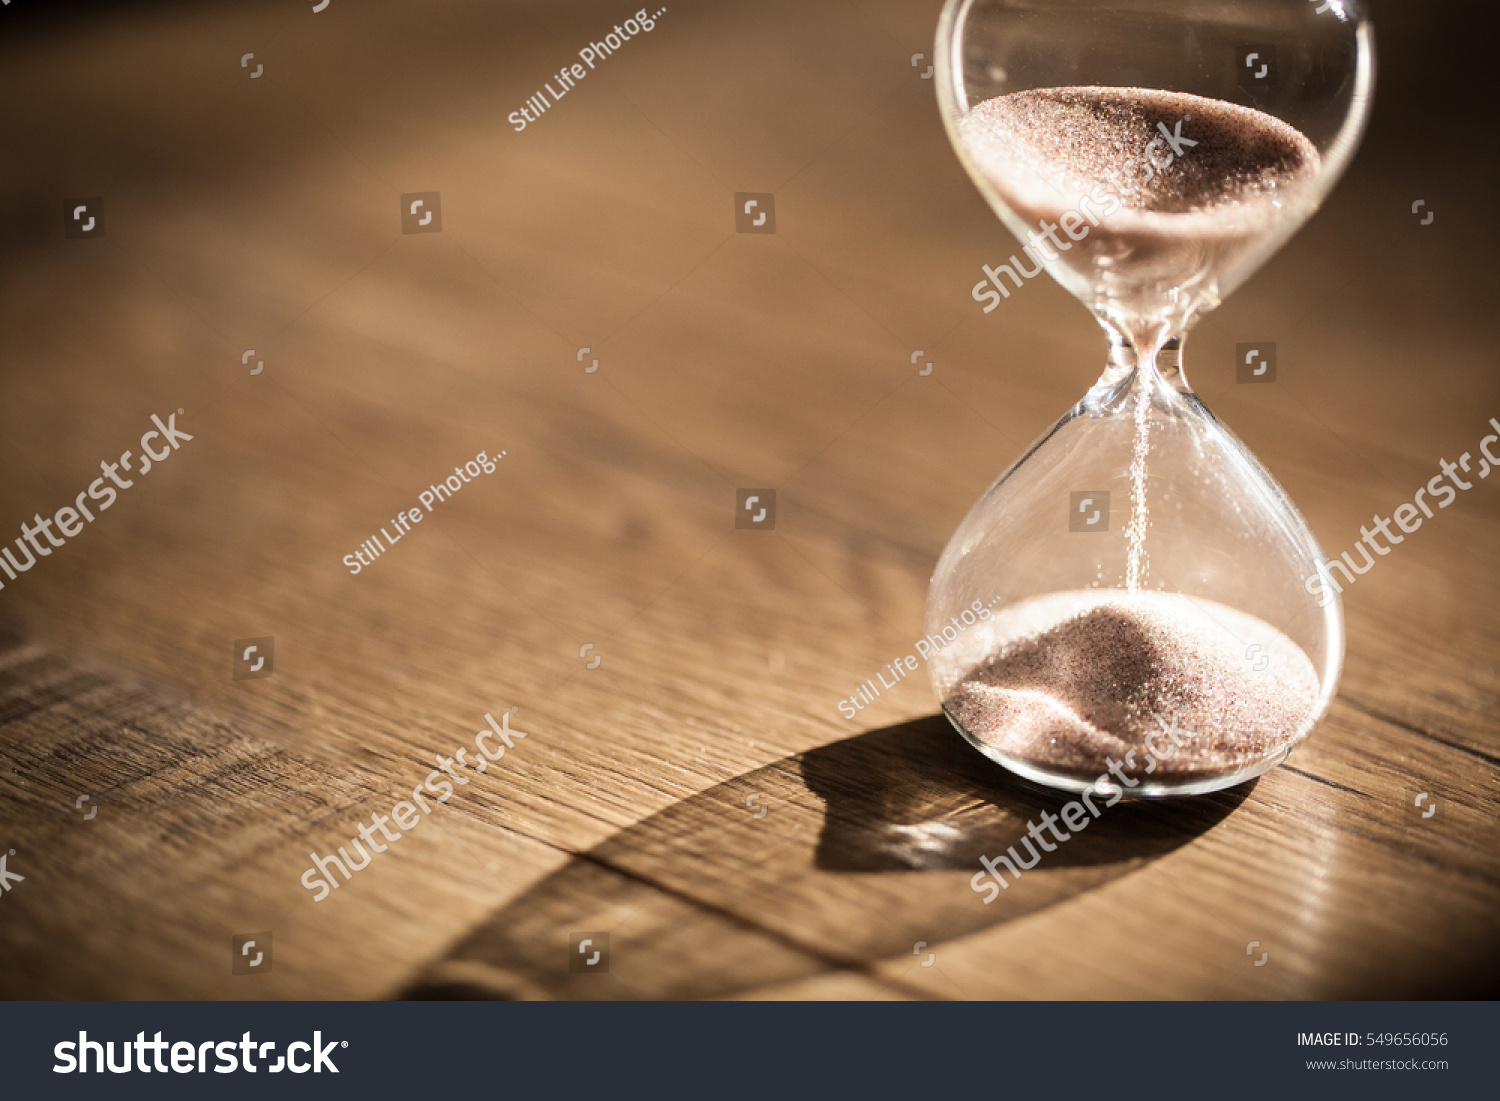 Hourglass as time passing concept for business deadline, urgency and running out of time. #549656056